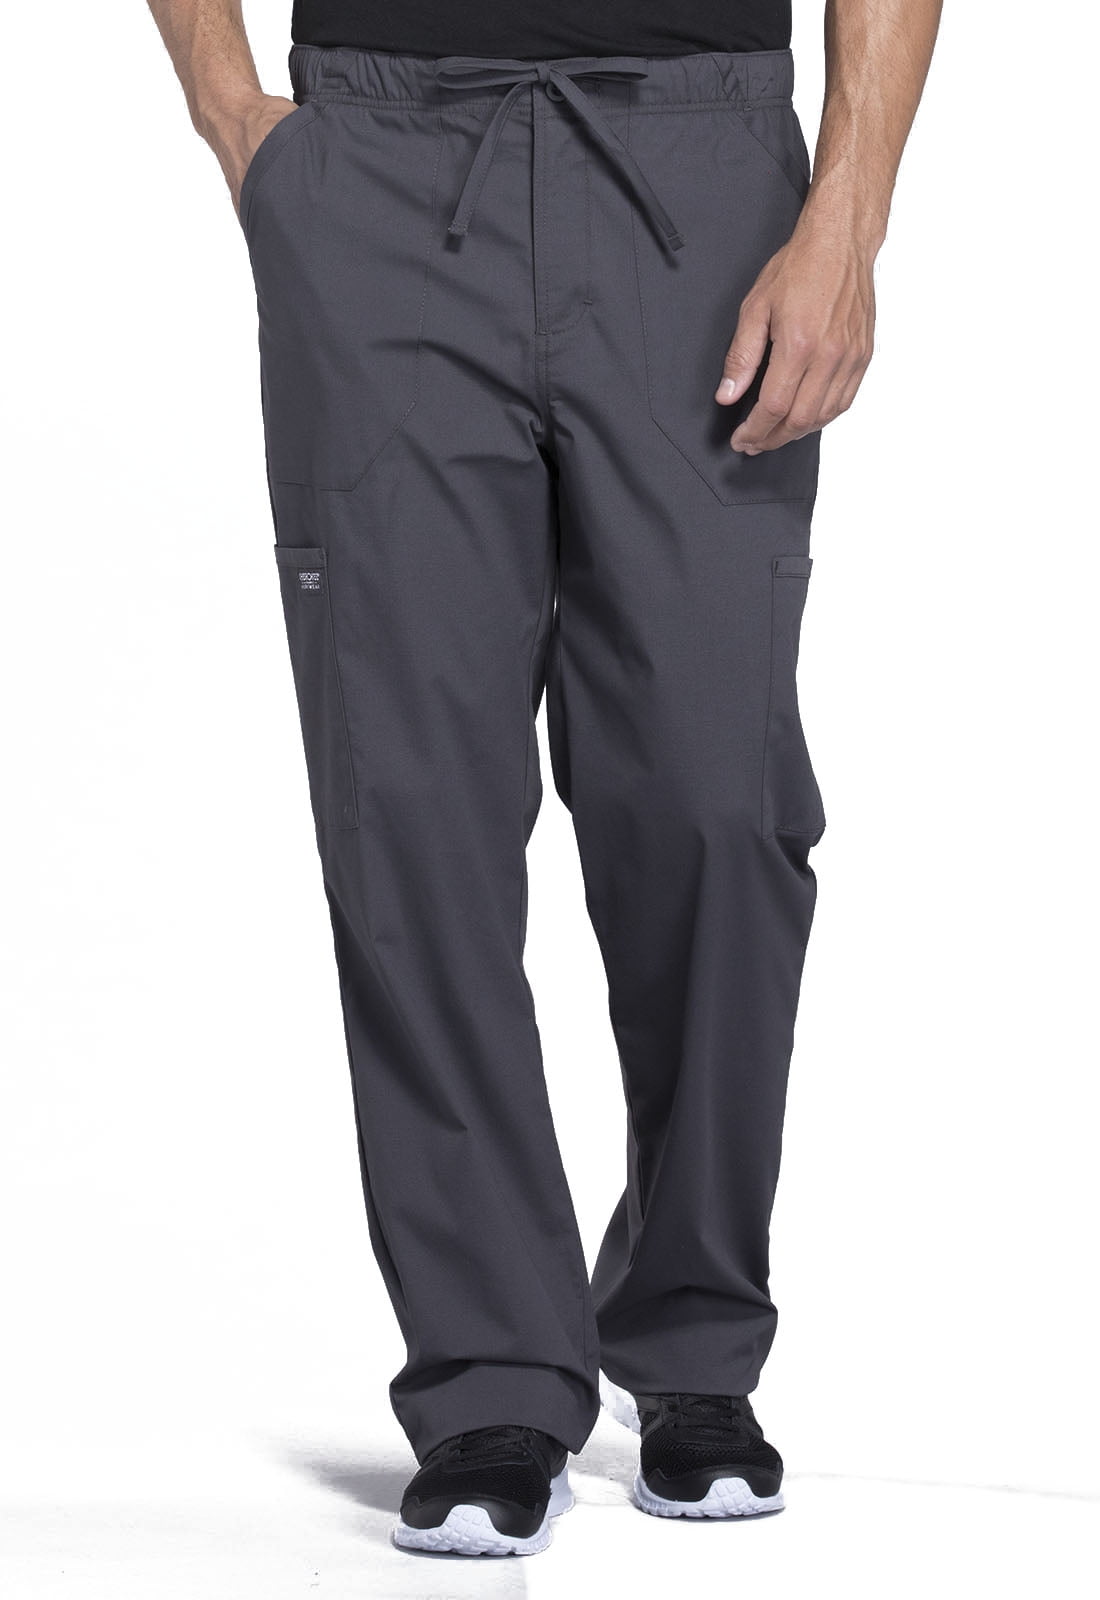 Details about   2021 Work clothes men's waterproof clothes breathable trousers 